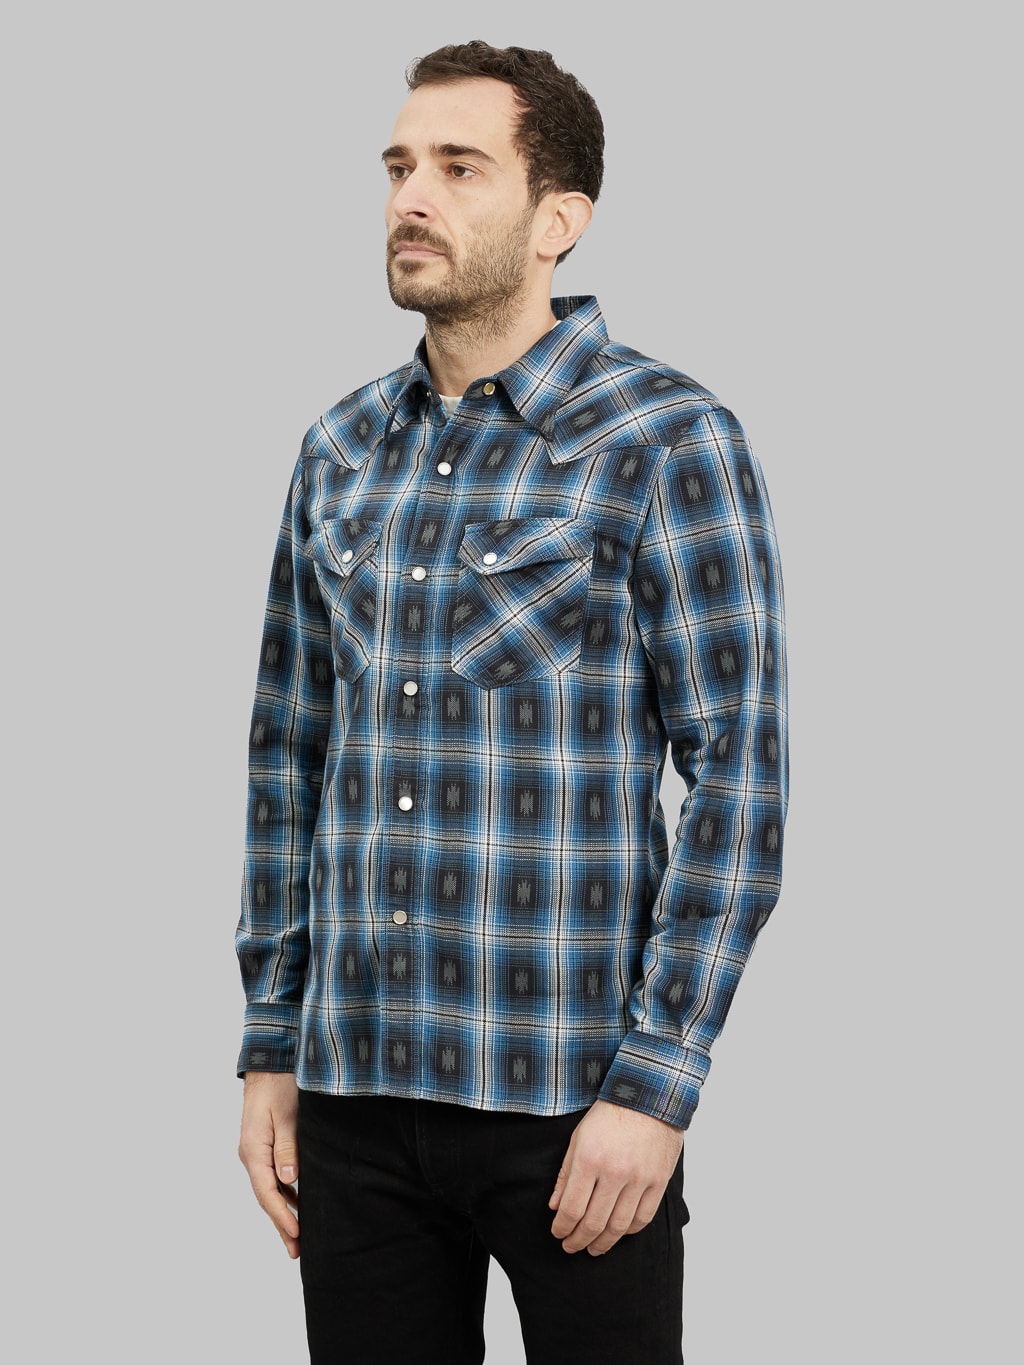 The Flat Head Native Check Western Shirt blue model side fit